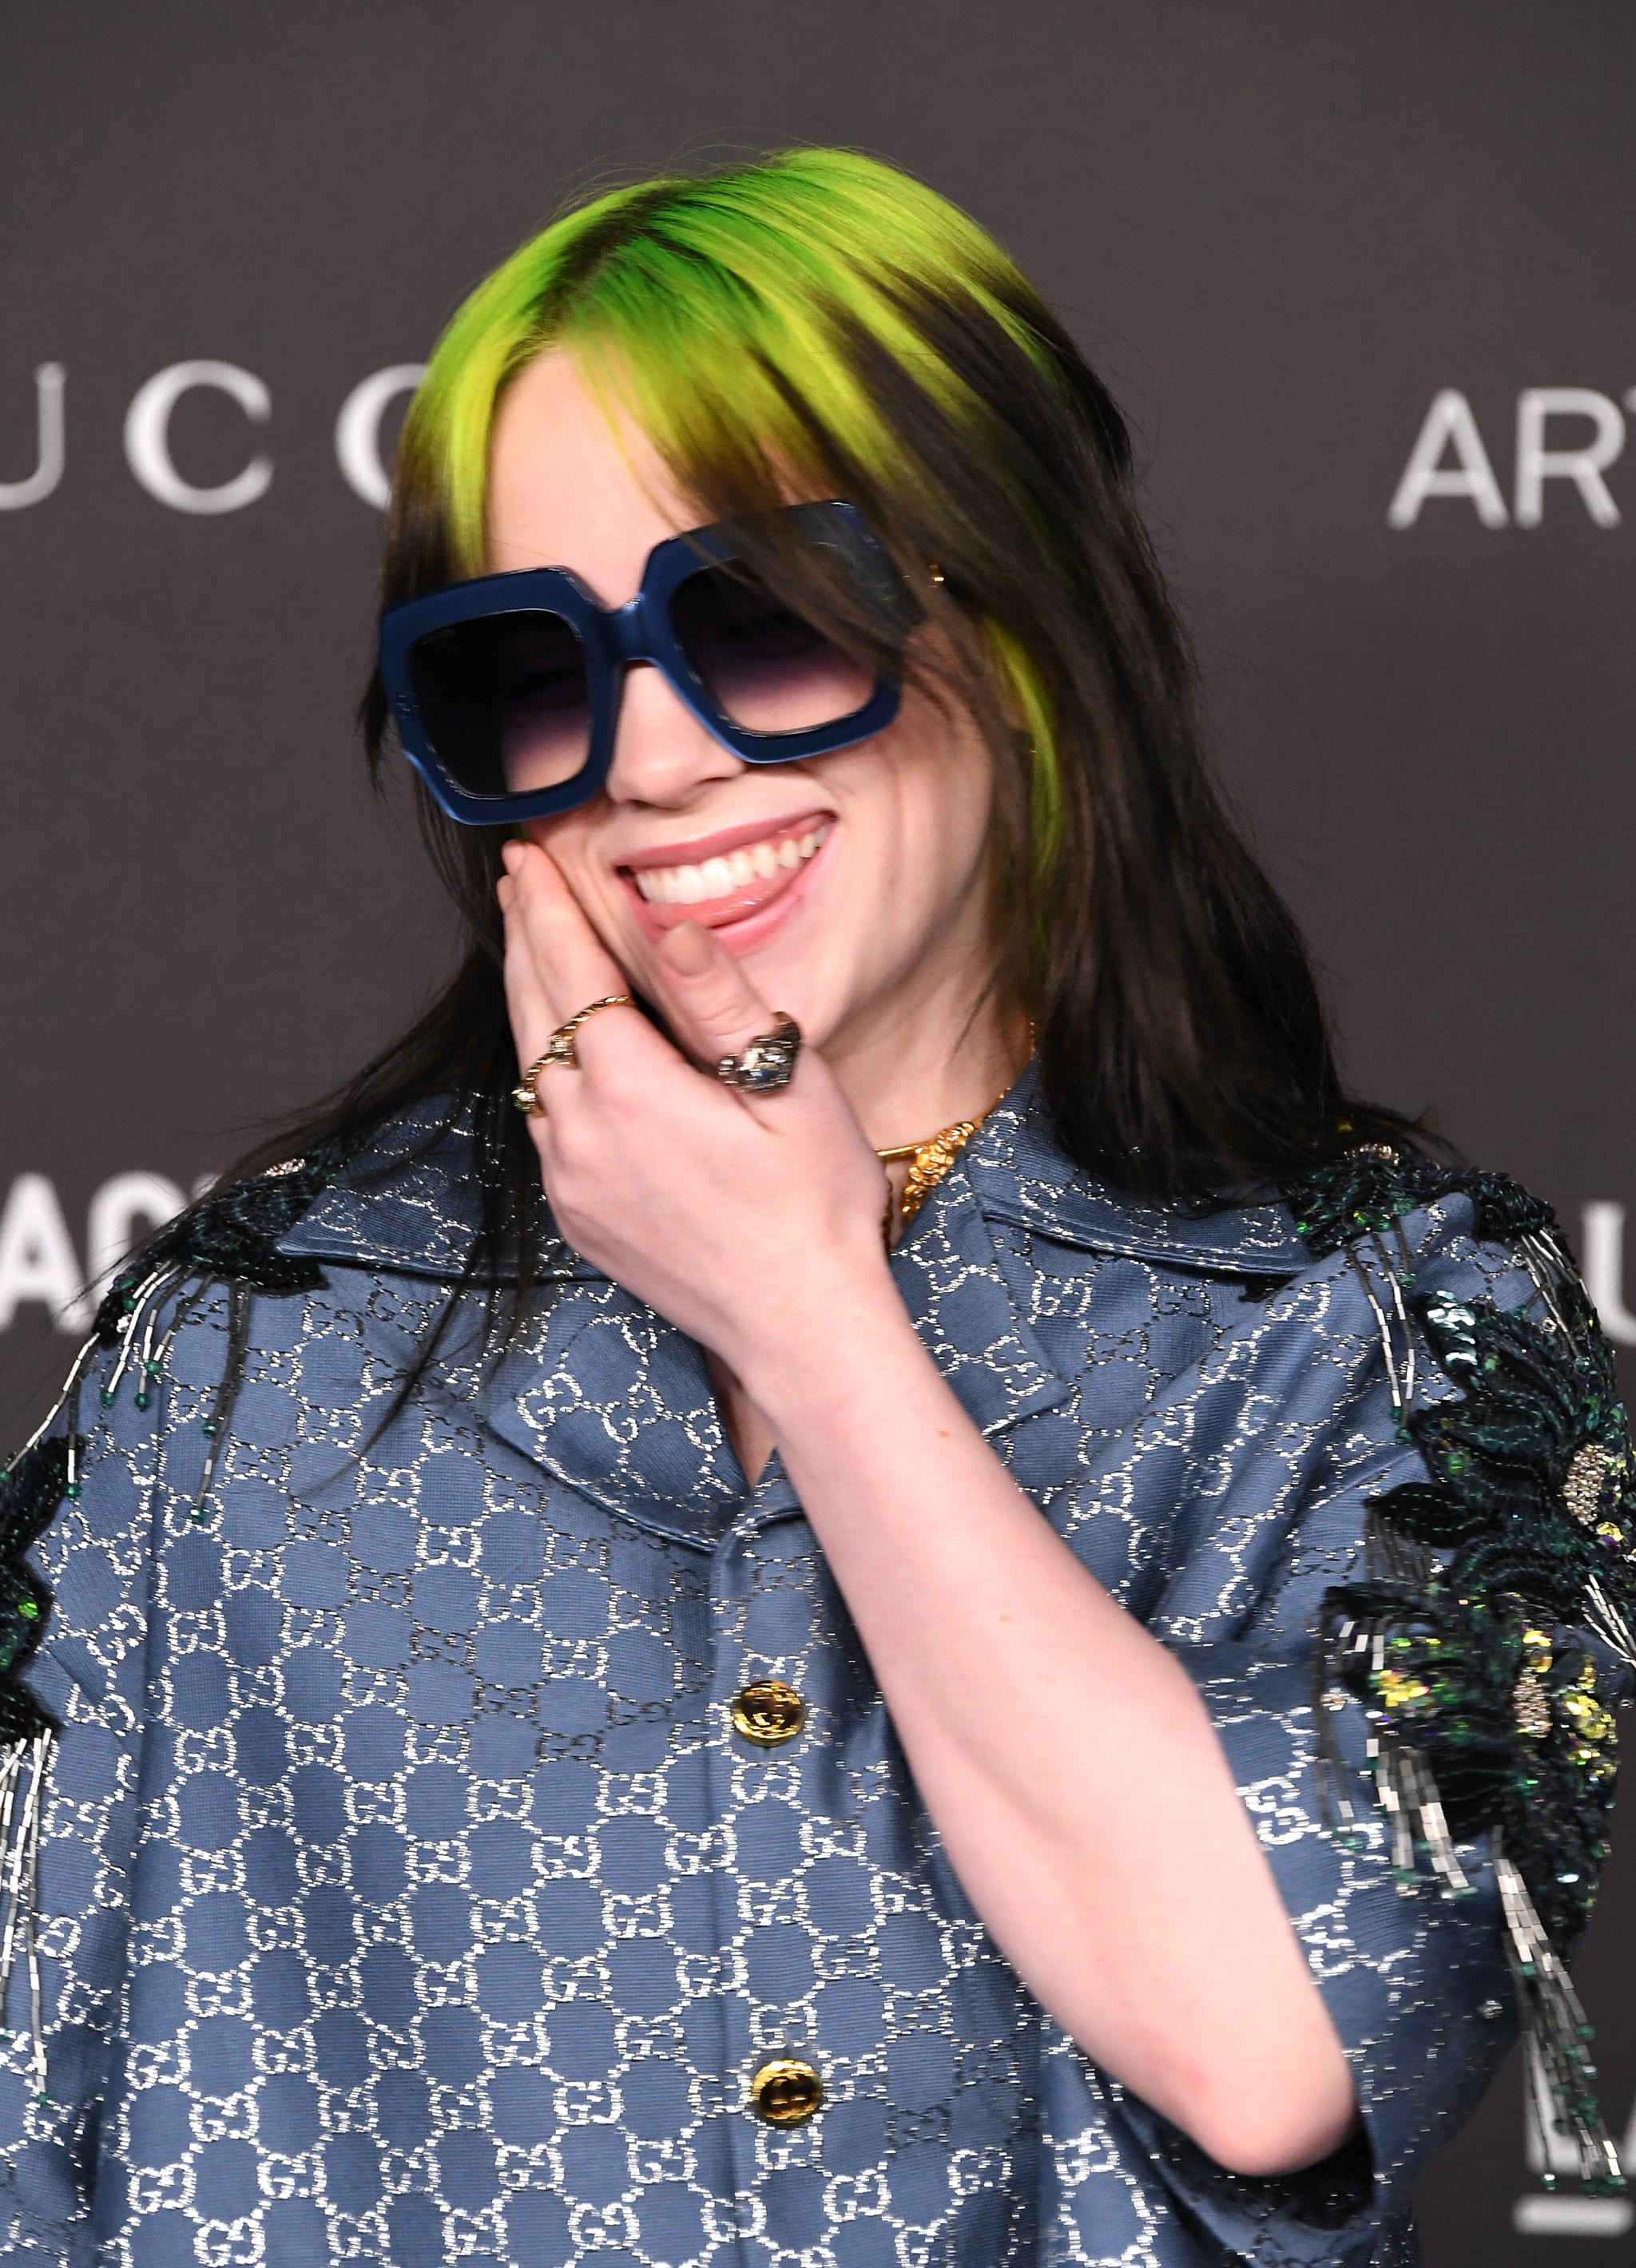 Fashion, Shopping & Style | Billie Eilish Wore Head-to-Toe Gucci and Looked a Total Badass POPSUGAR Fashion Photo 4